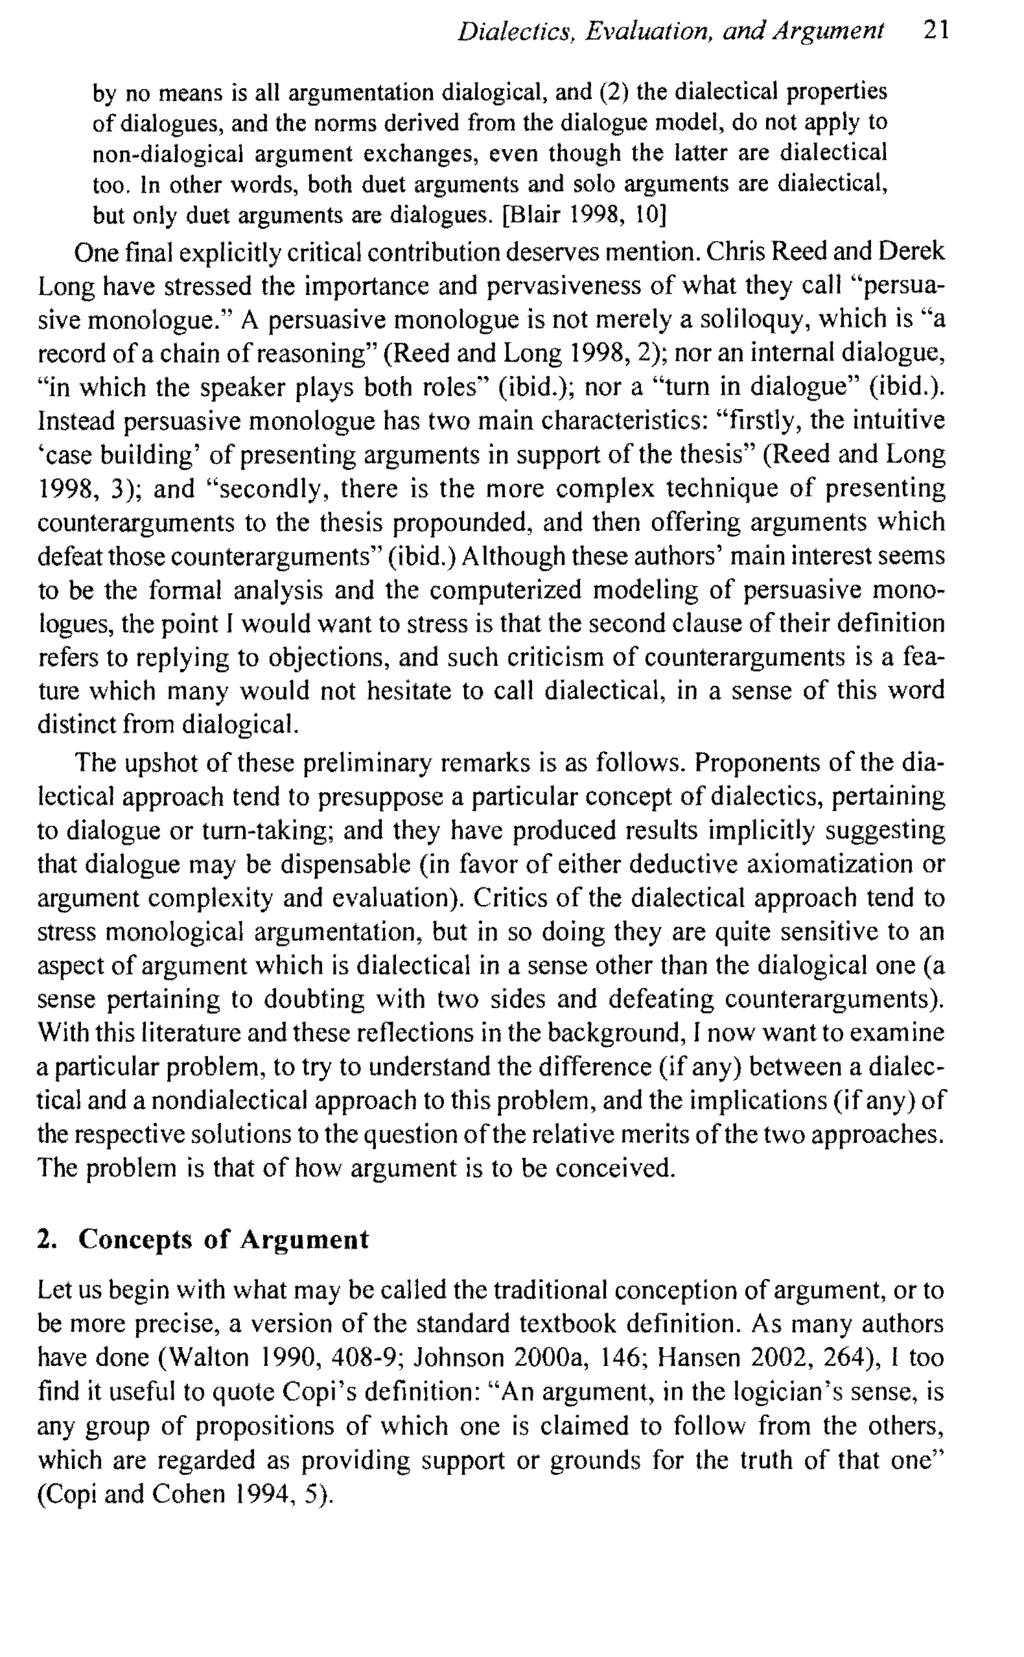 Dialectics, Evaluation, and Argument 21 by no means is all argumentation dialogical, and (2) the dialectical properties of dialogues, and the norms derived from the dialogue model, do not apply to